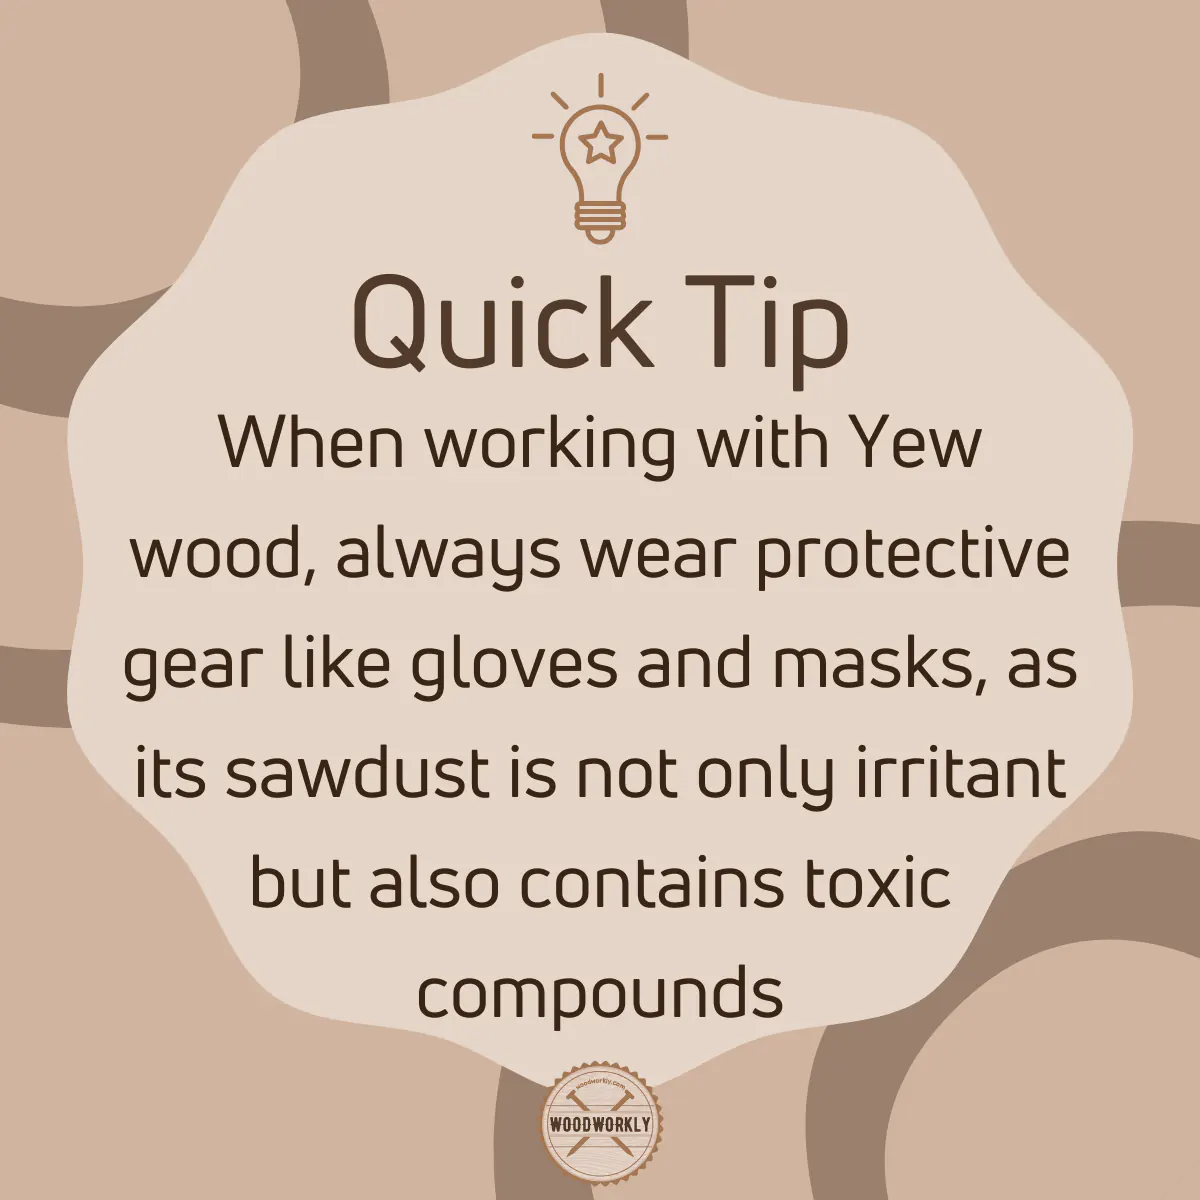 Tip for working with Yew wood